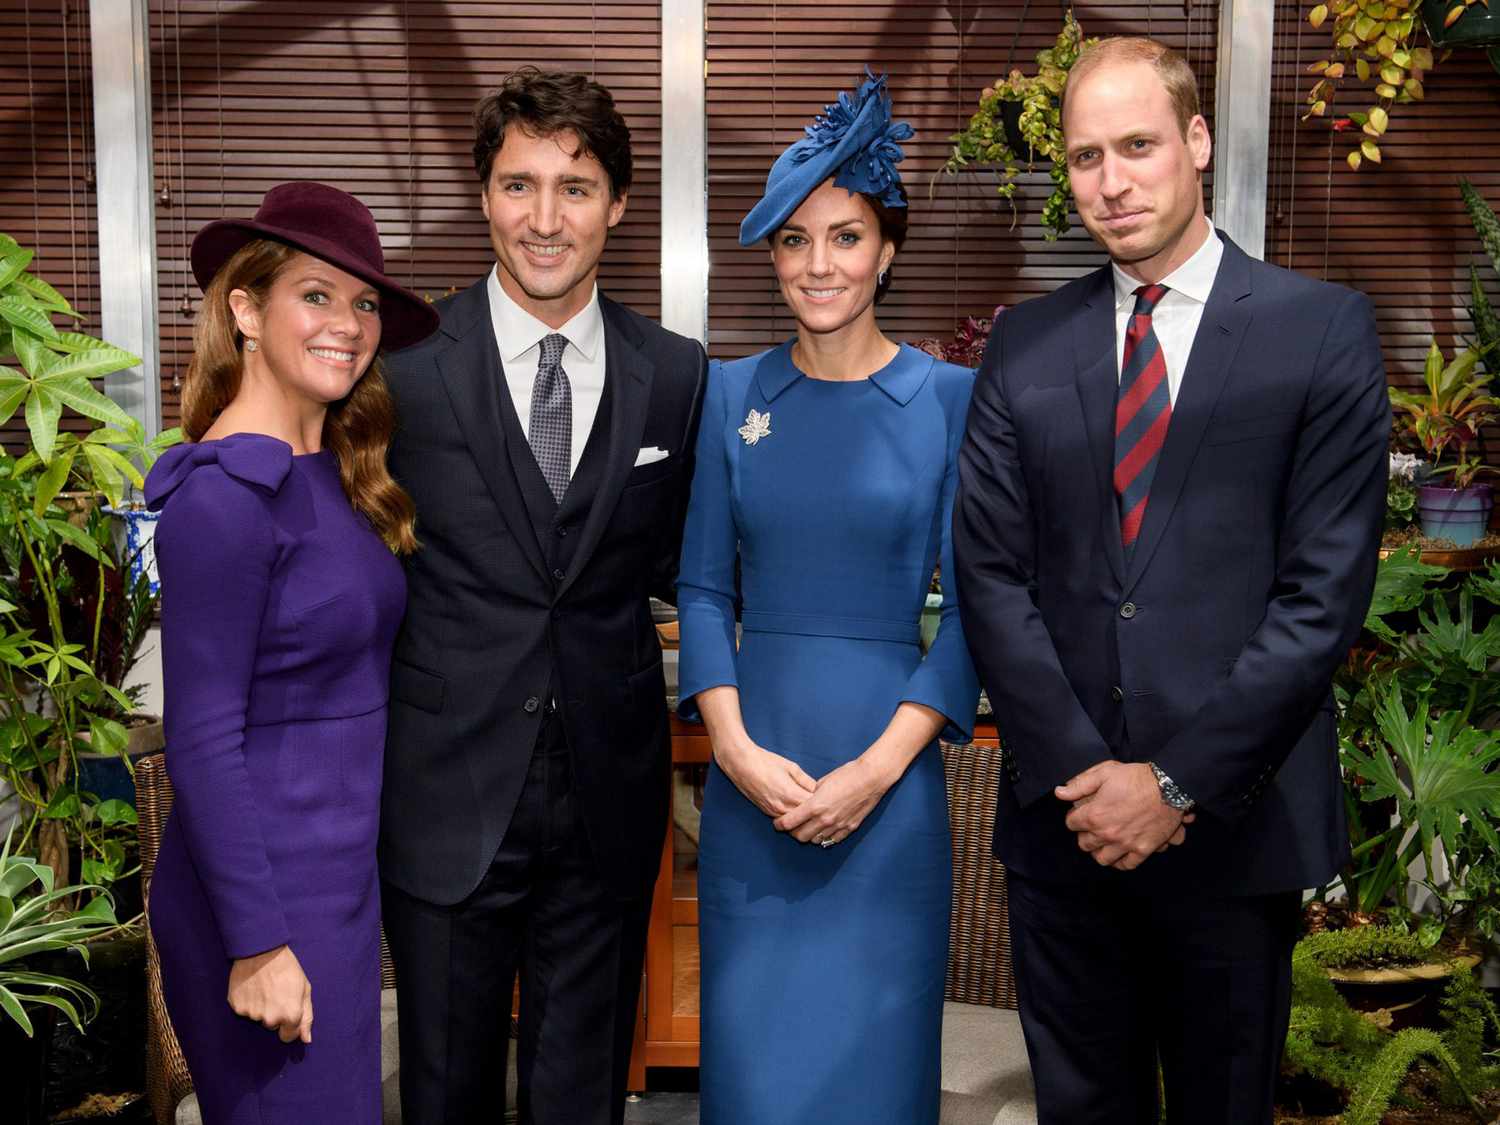 Duchess of Cambridge Catherine With Sophie Gregoire-Trudeau, Prime Minister Justin Trudeau, and Prince William in Victoria, Canada&nbsp;on September 24, 2016